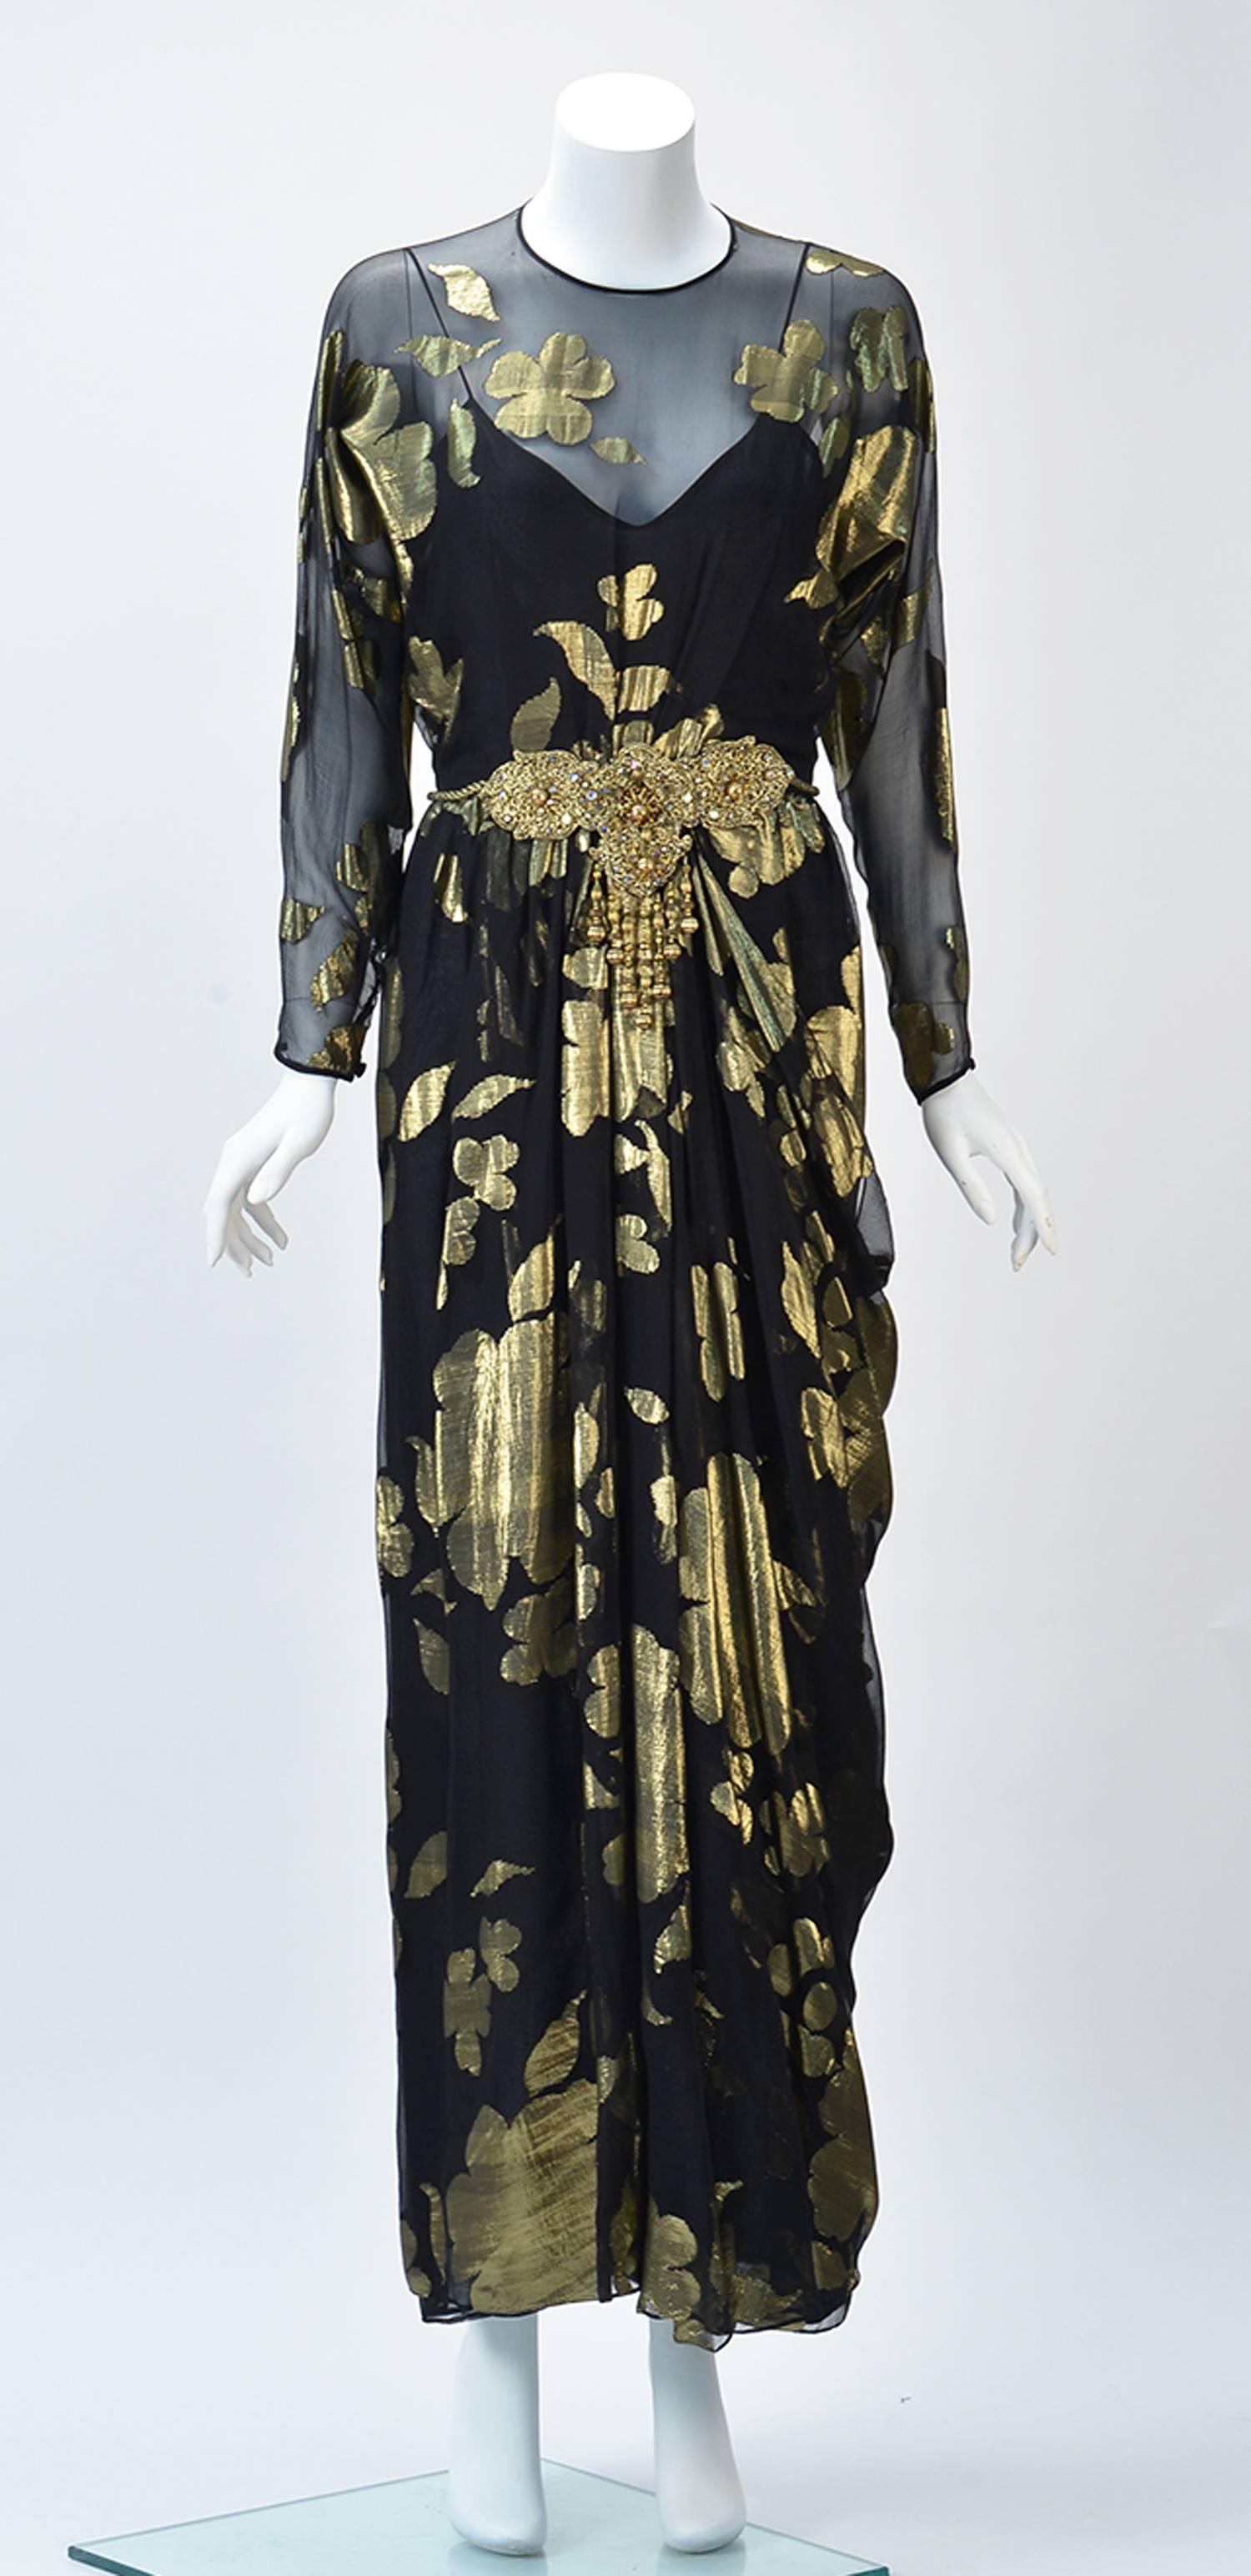 Dynamic Asian and Indian inspired Oscar de la Renta sheer black with metallic flower dress ensemble. Intricately designed with delicate details.

Dress: Long black sheer with metallic gold flowers dress with long bat-wing sleeves button at cuff.